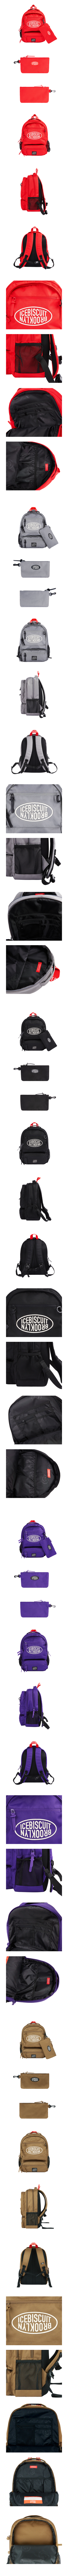 Icebiscuit symbol logo pouch backpack 상세 이미지